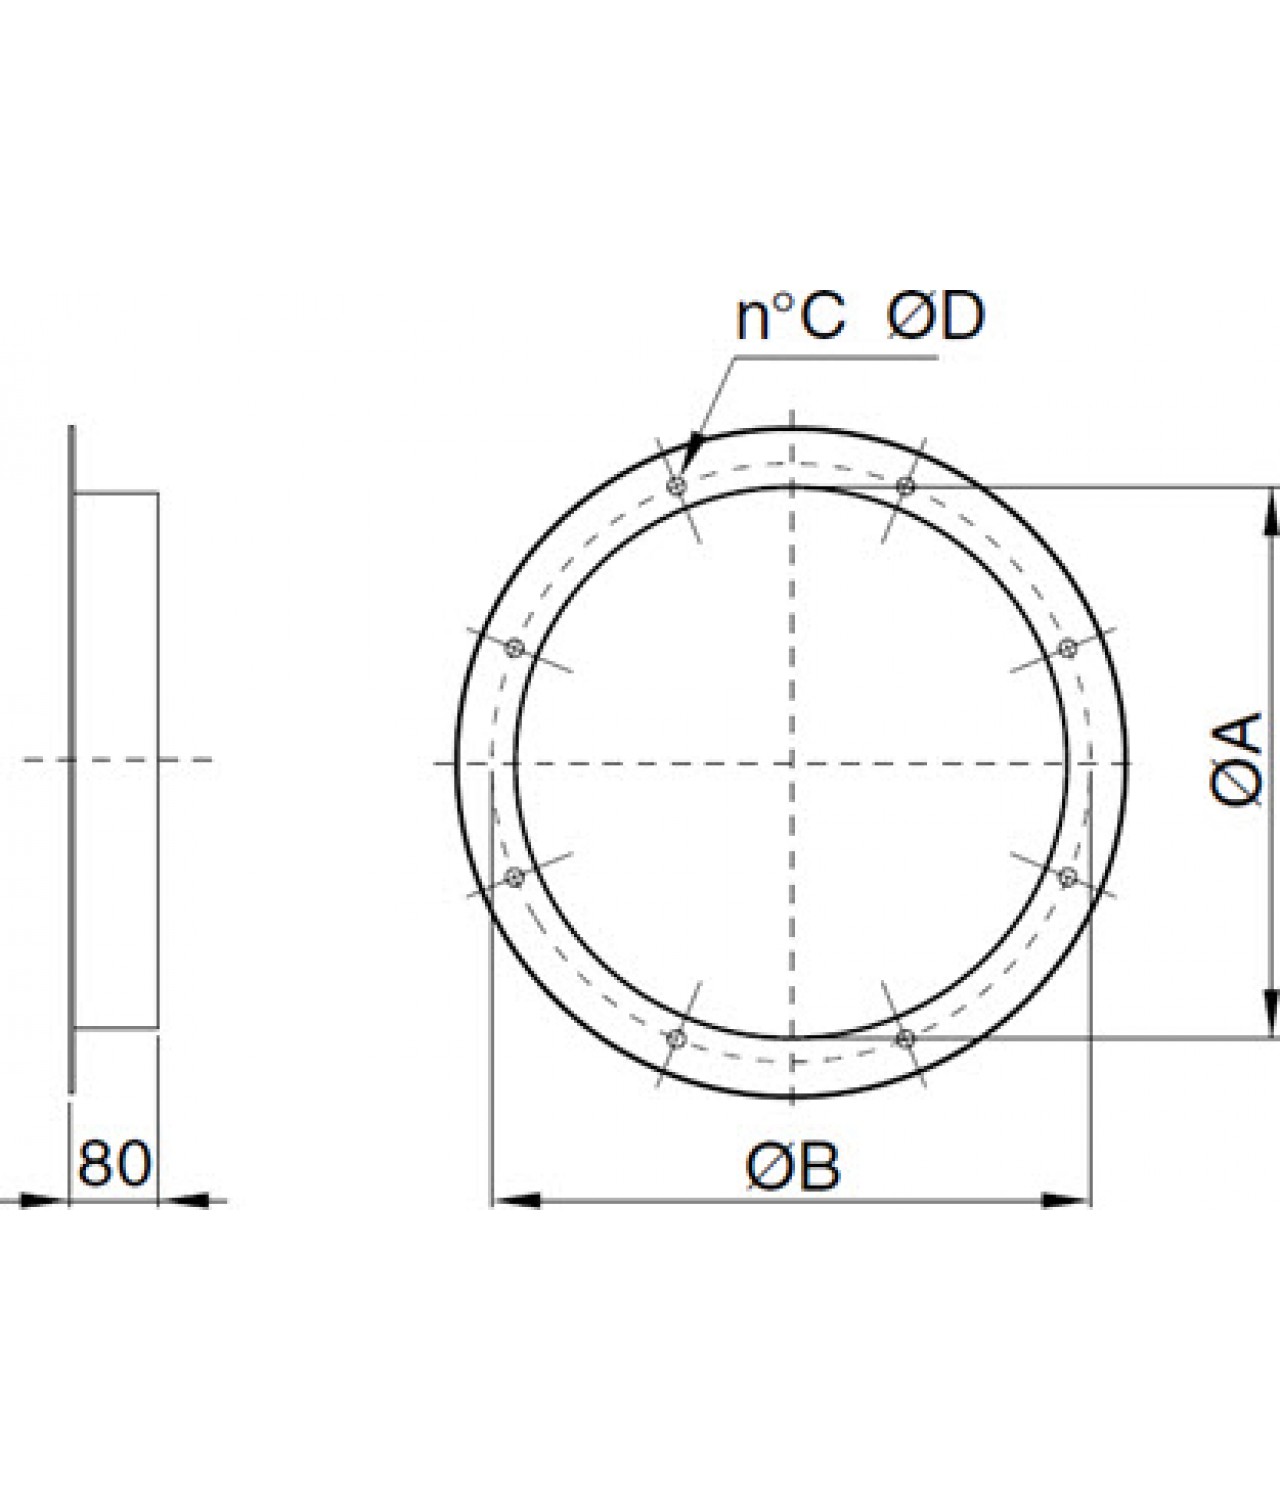 CCf - connection ring with flange, ordered separately